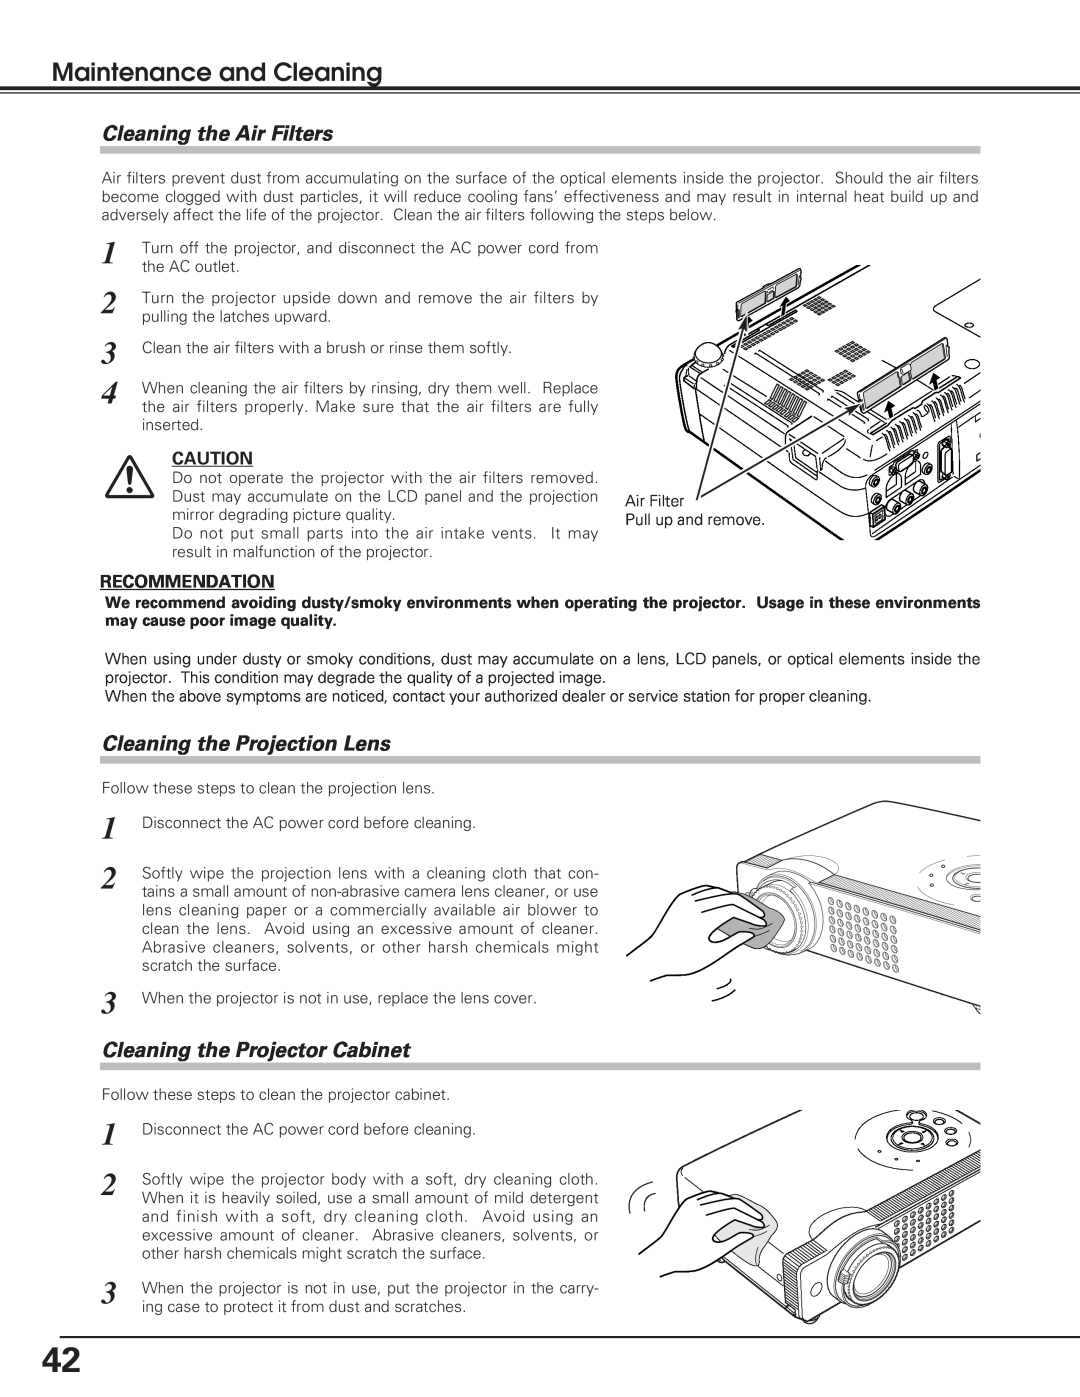 Sanyo PLC-SL20 owner manual Maintenance and Cleaning, Cleaning the Air Filters, Cleaning the Projection Lens 